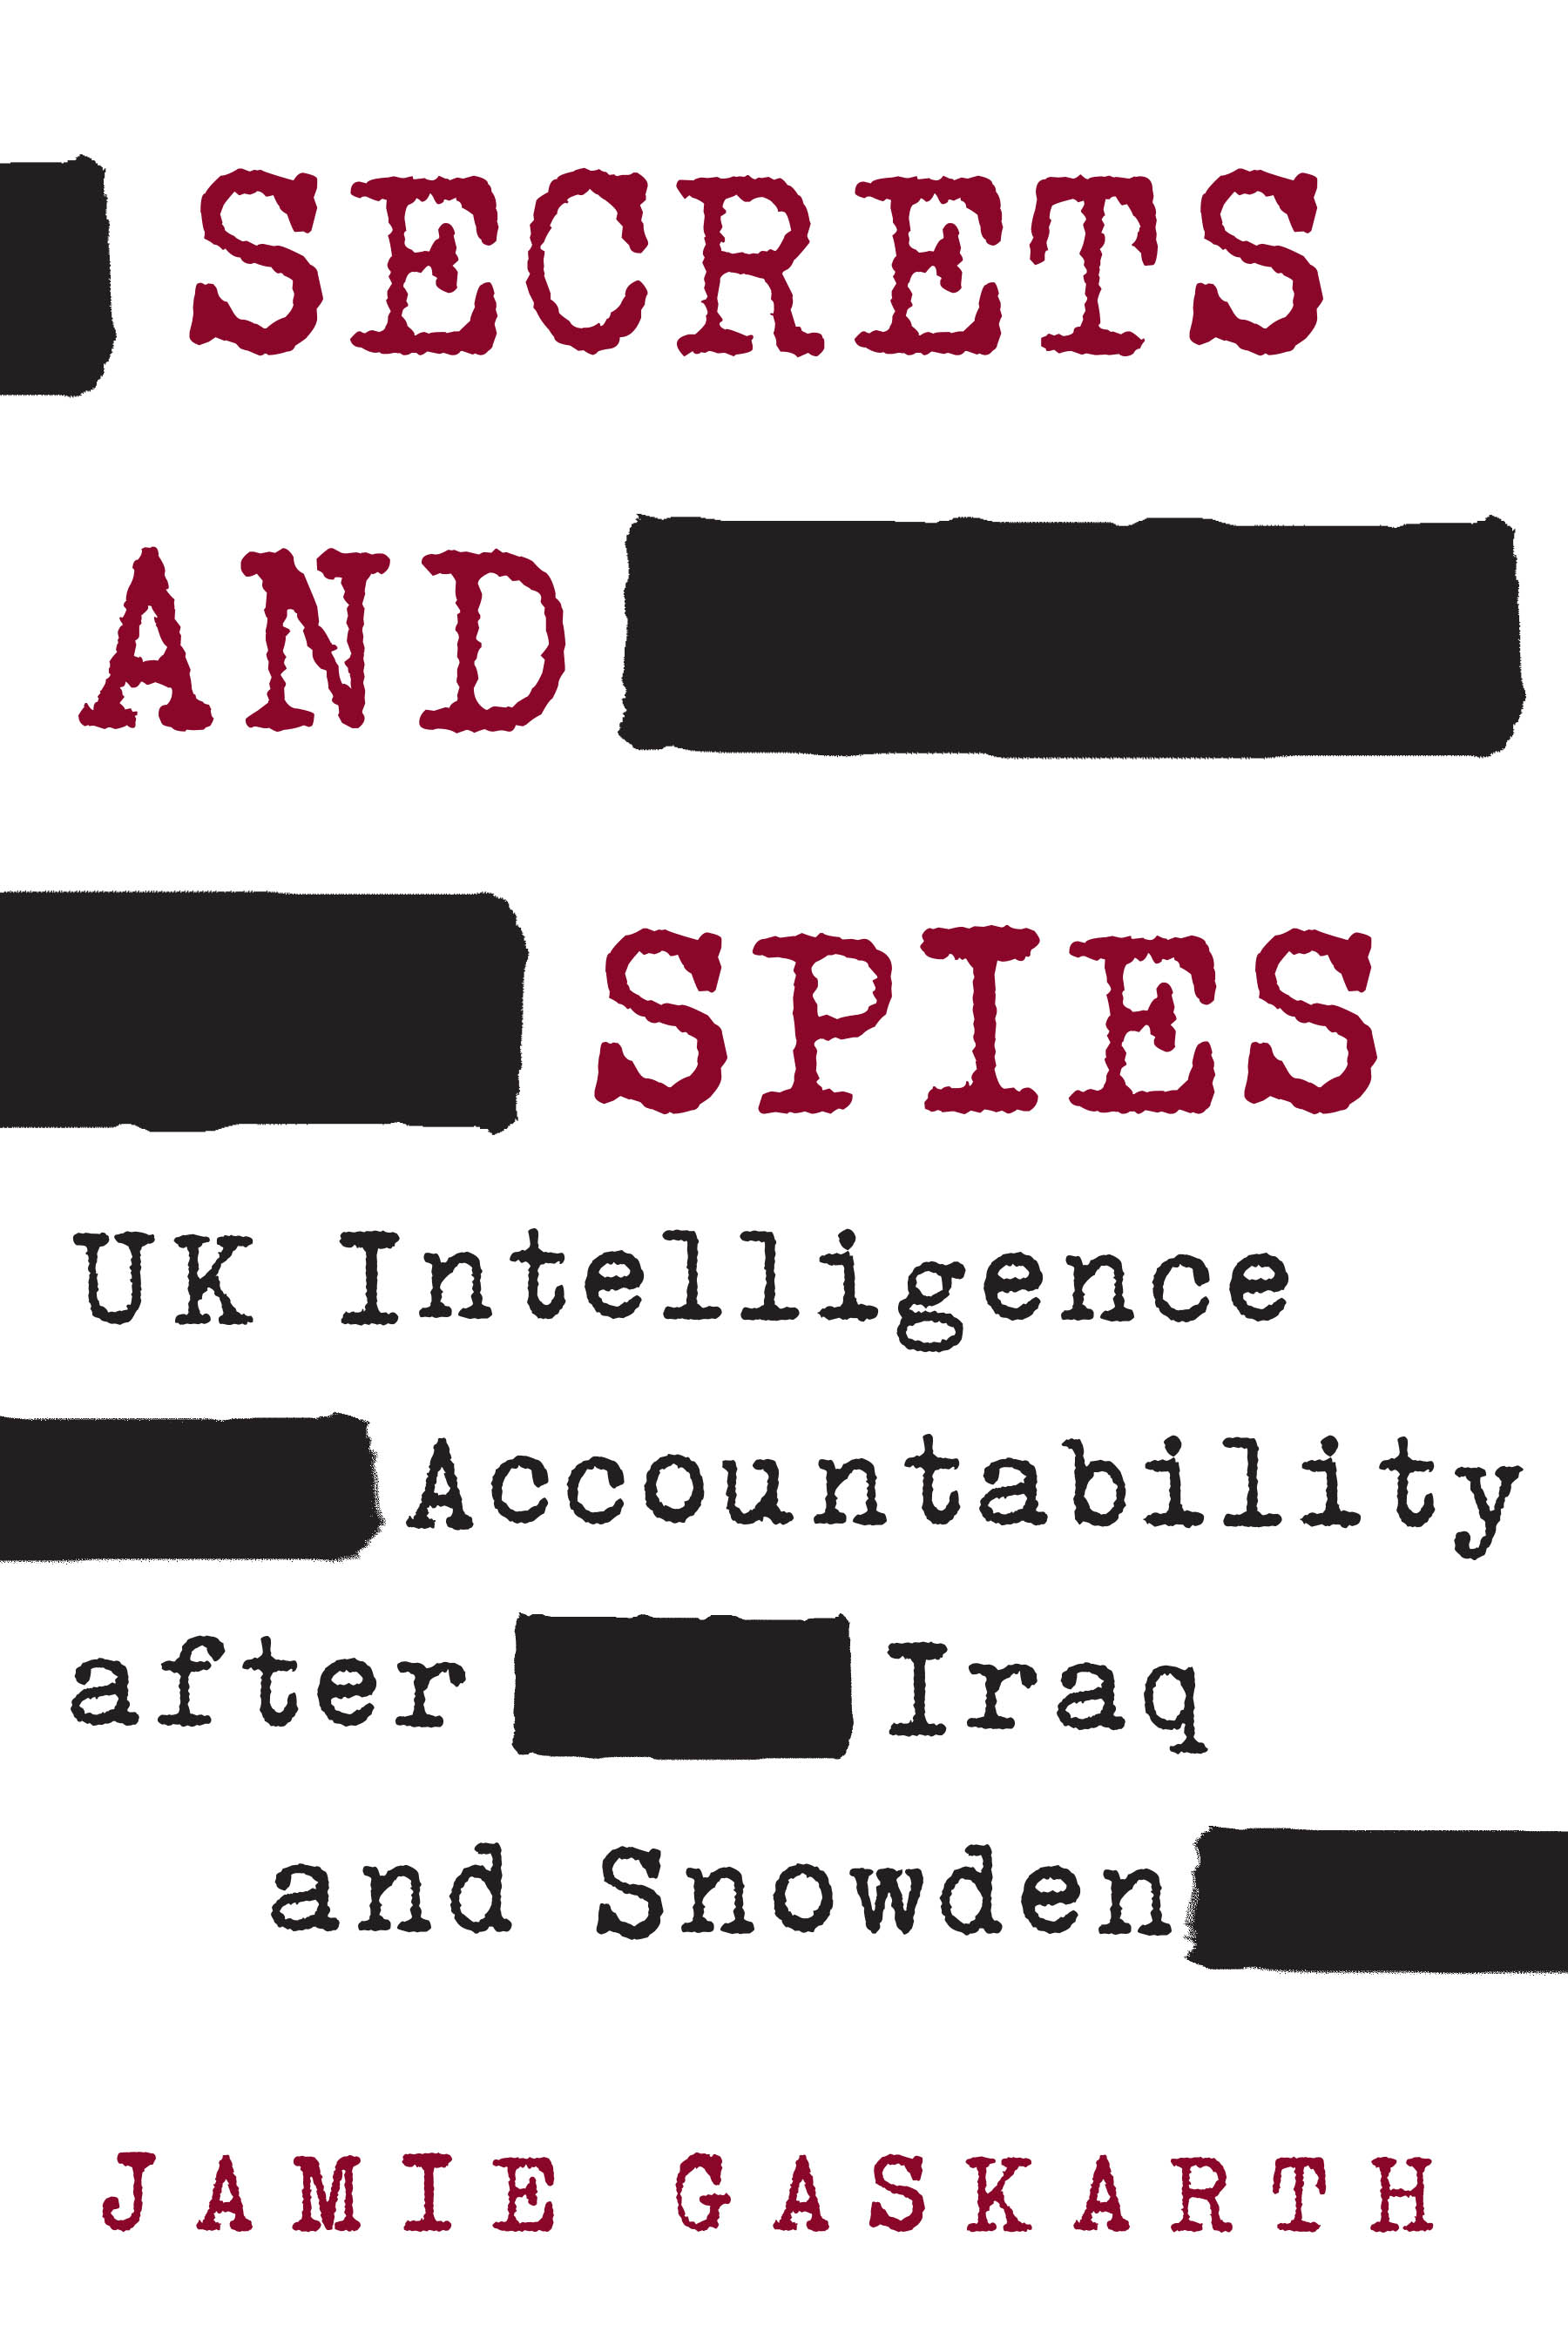 Secrets and Spies: UK Intelligence Accountability after Iraq and Snowden